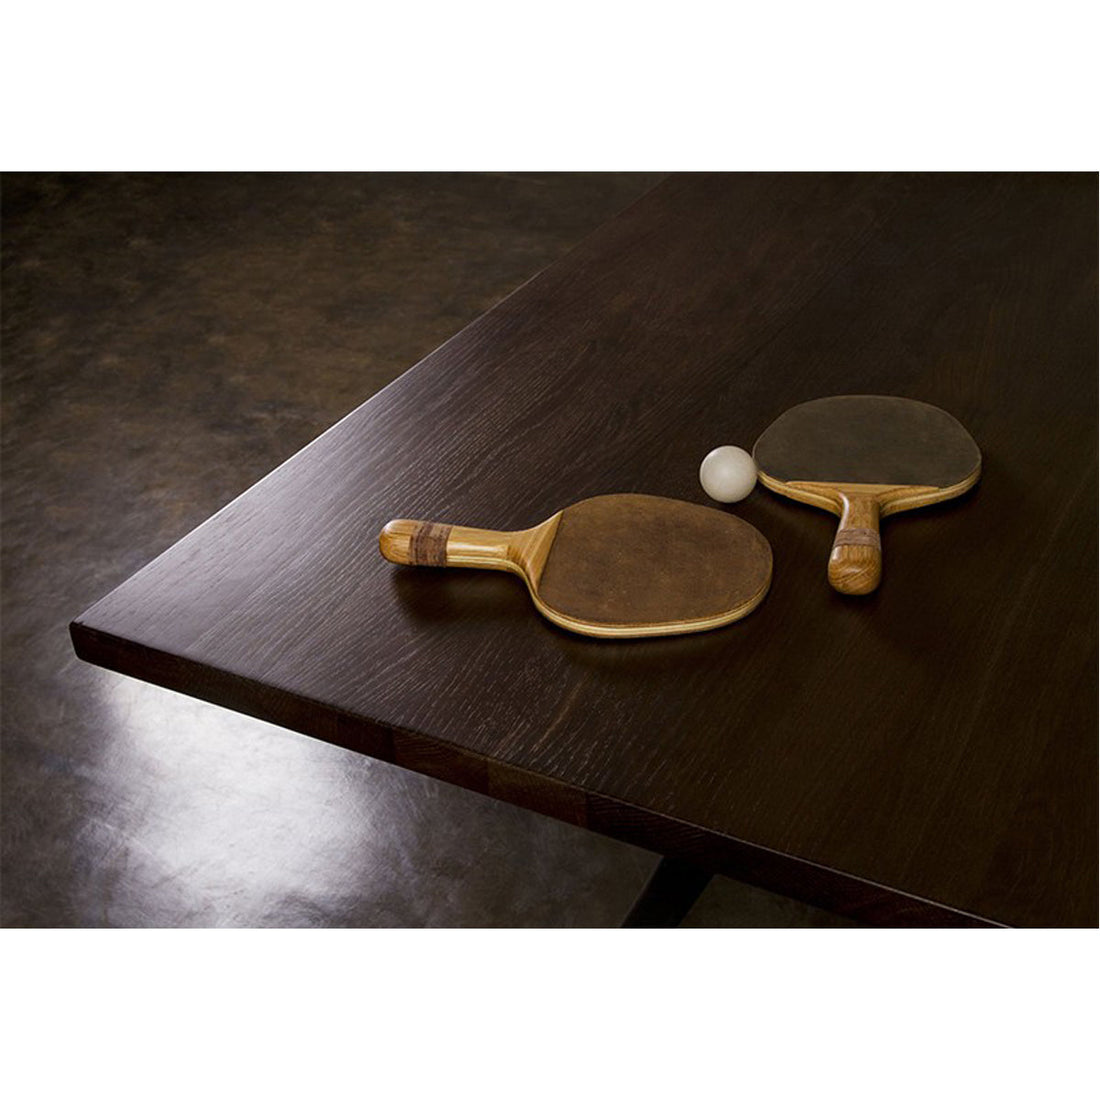 Nuevo Living Ping Pong Table Gaming Table